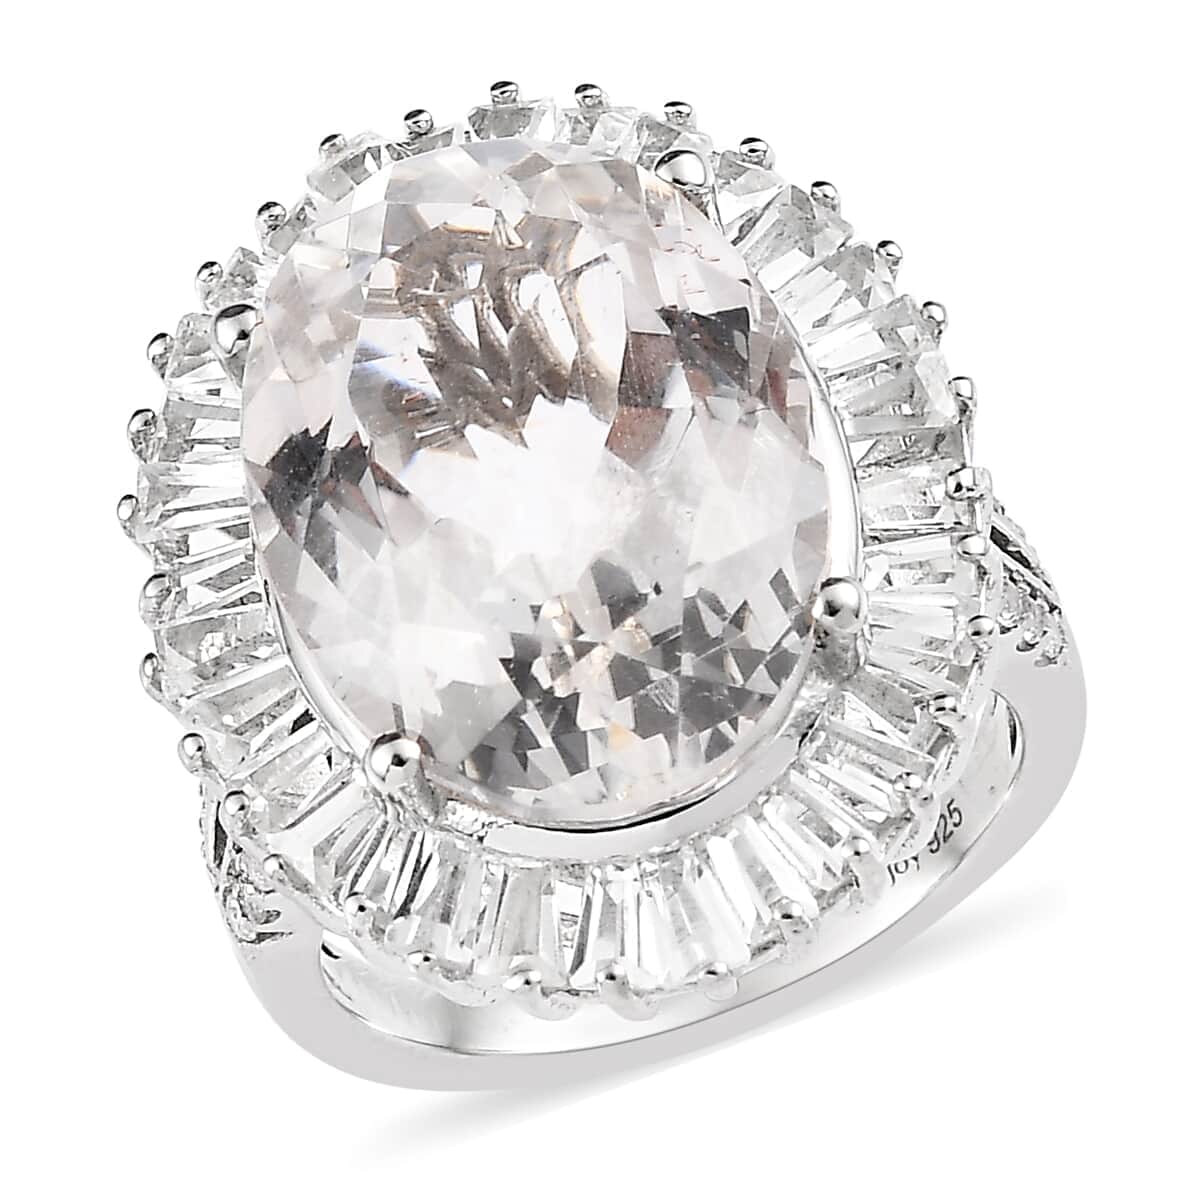 Buy White Topaz Floral Ring in Platinum Over Sterling Silver (Size